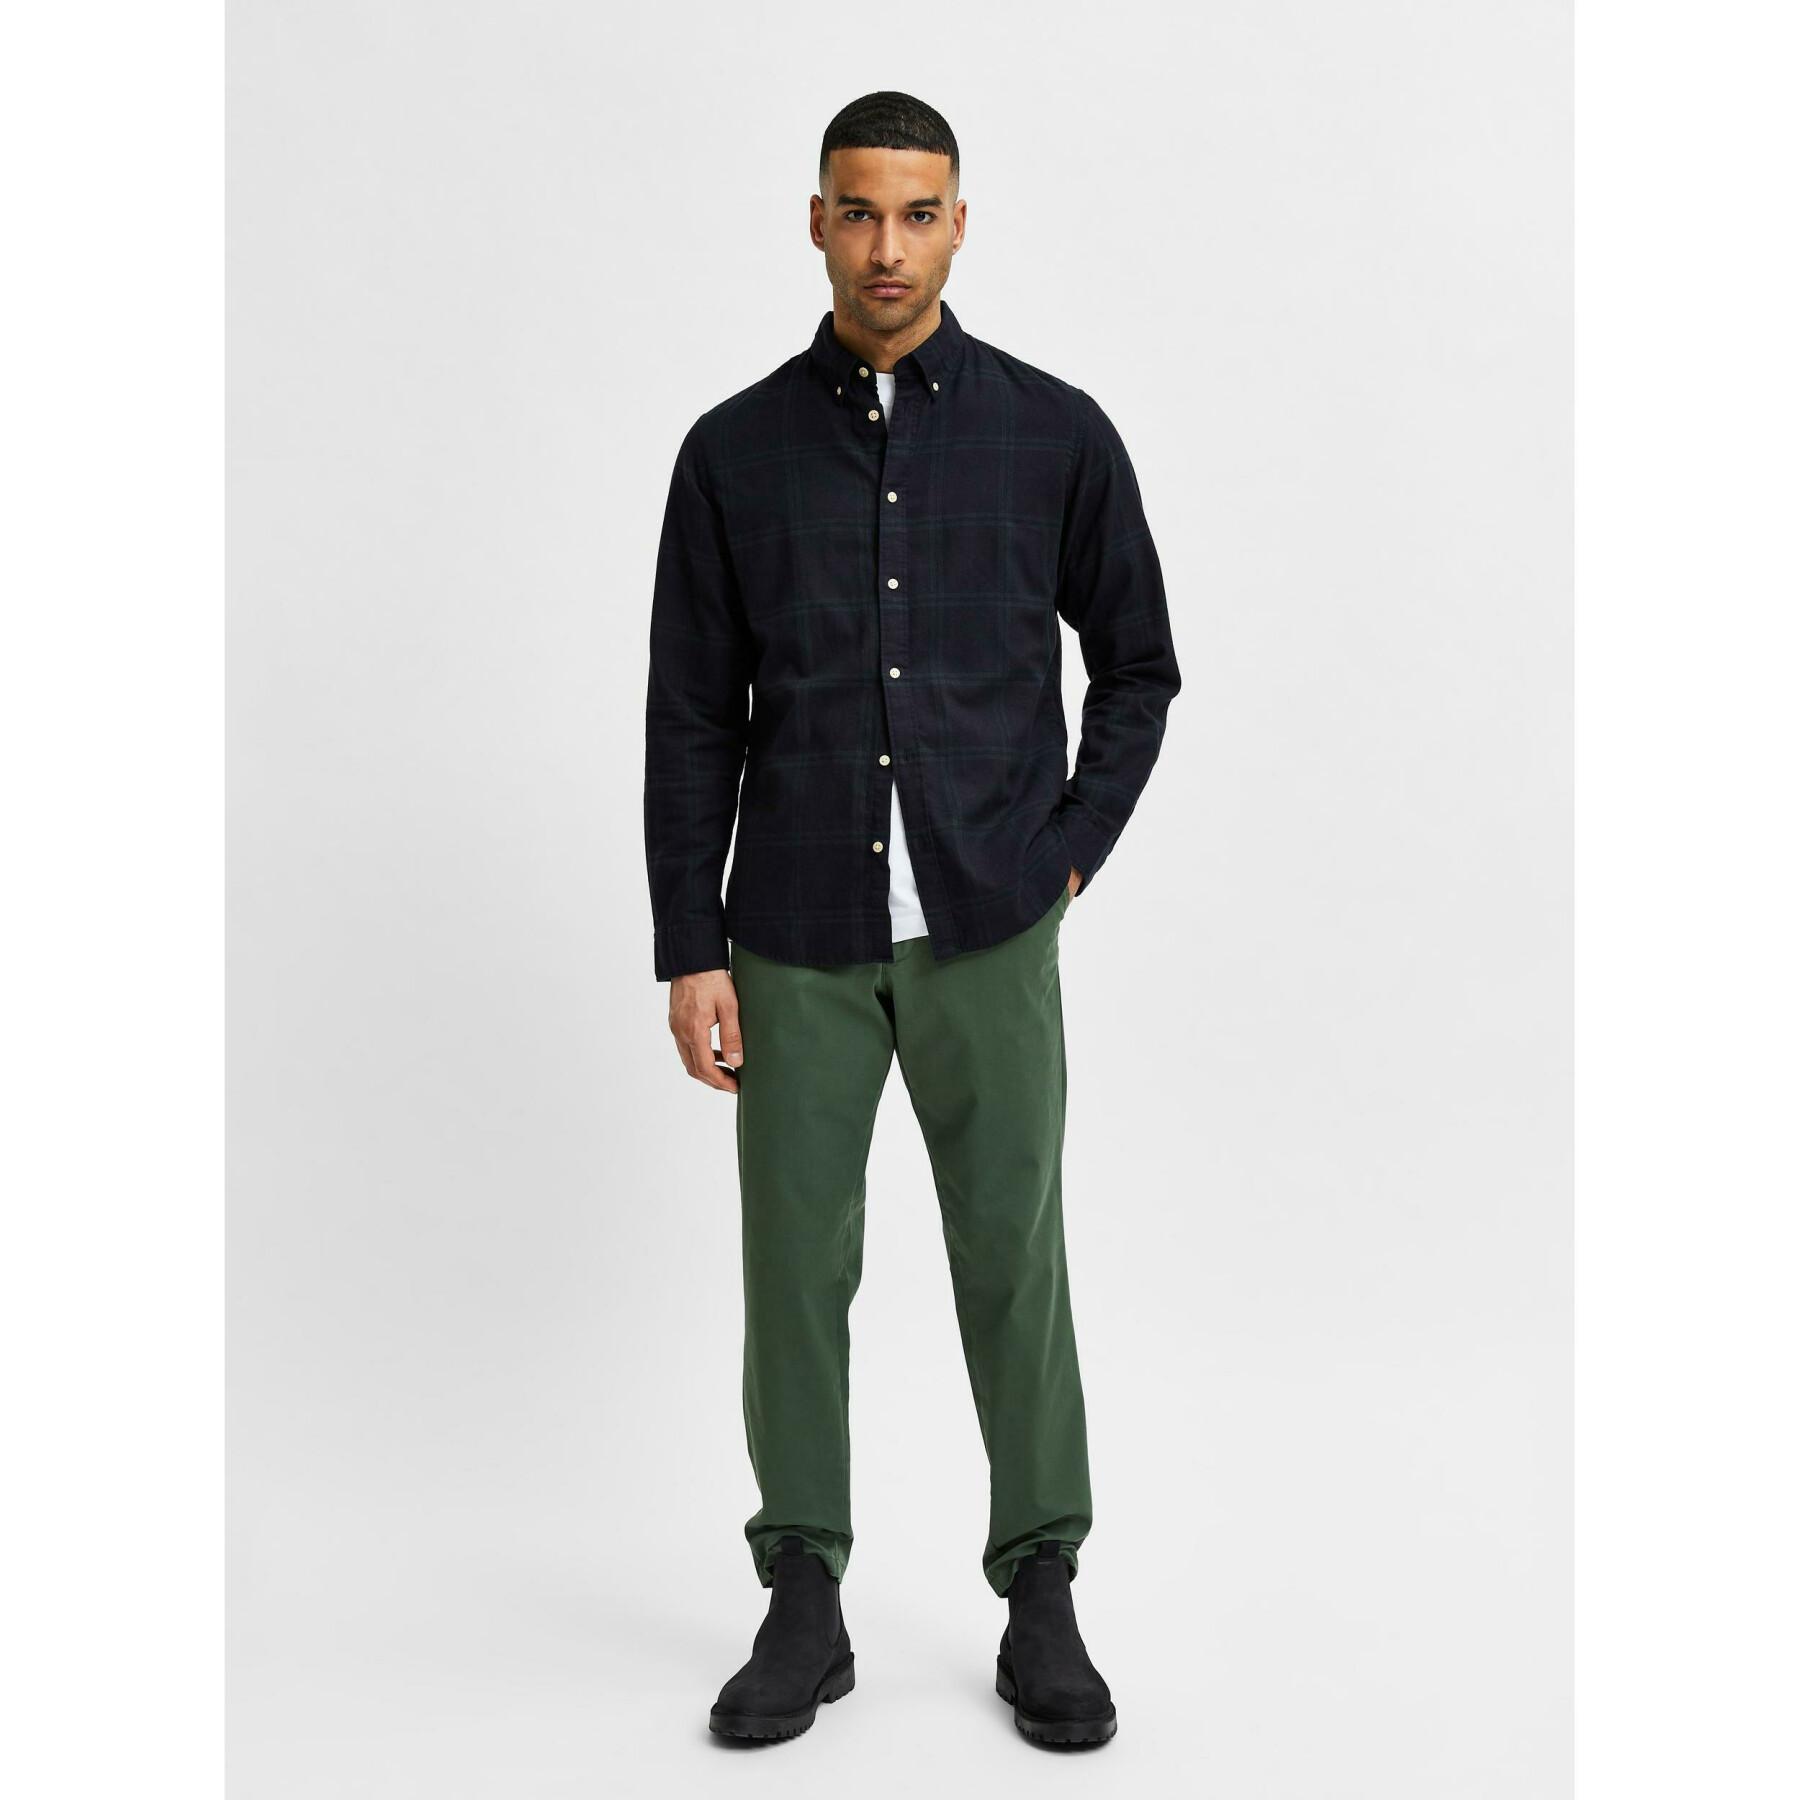 Skjorta Selected flannel manches longues slim